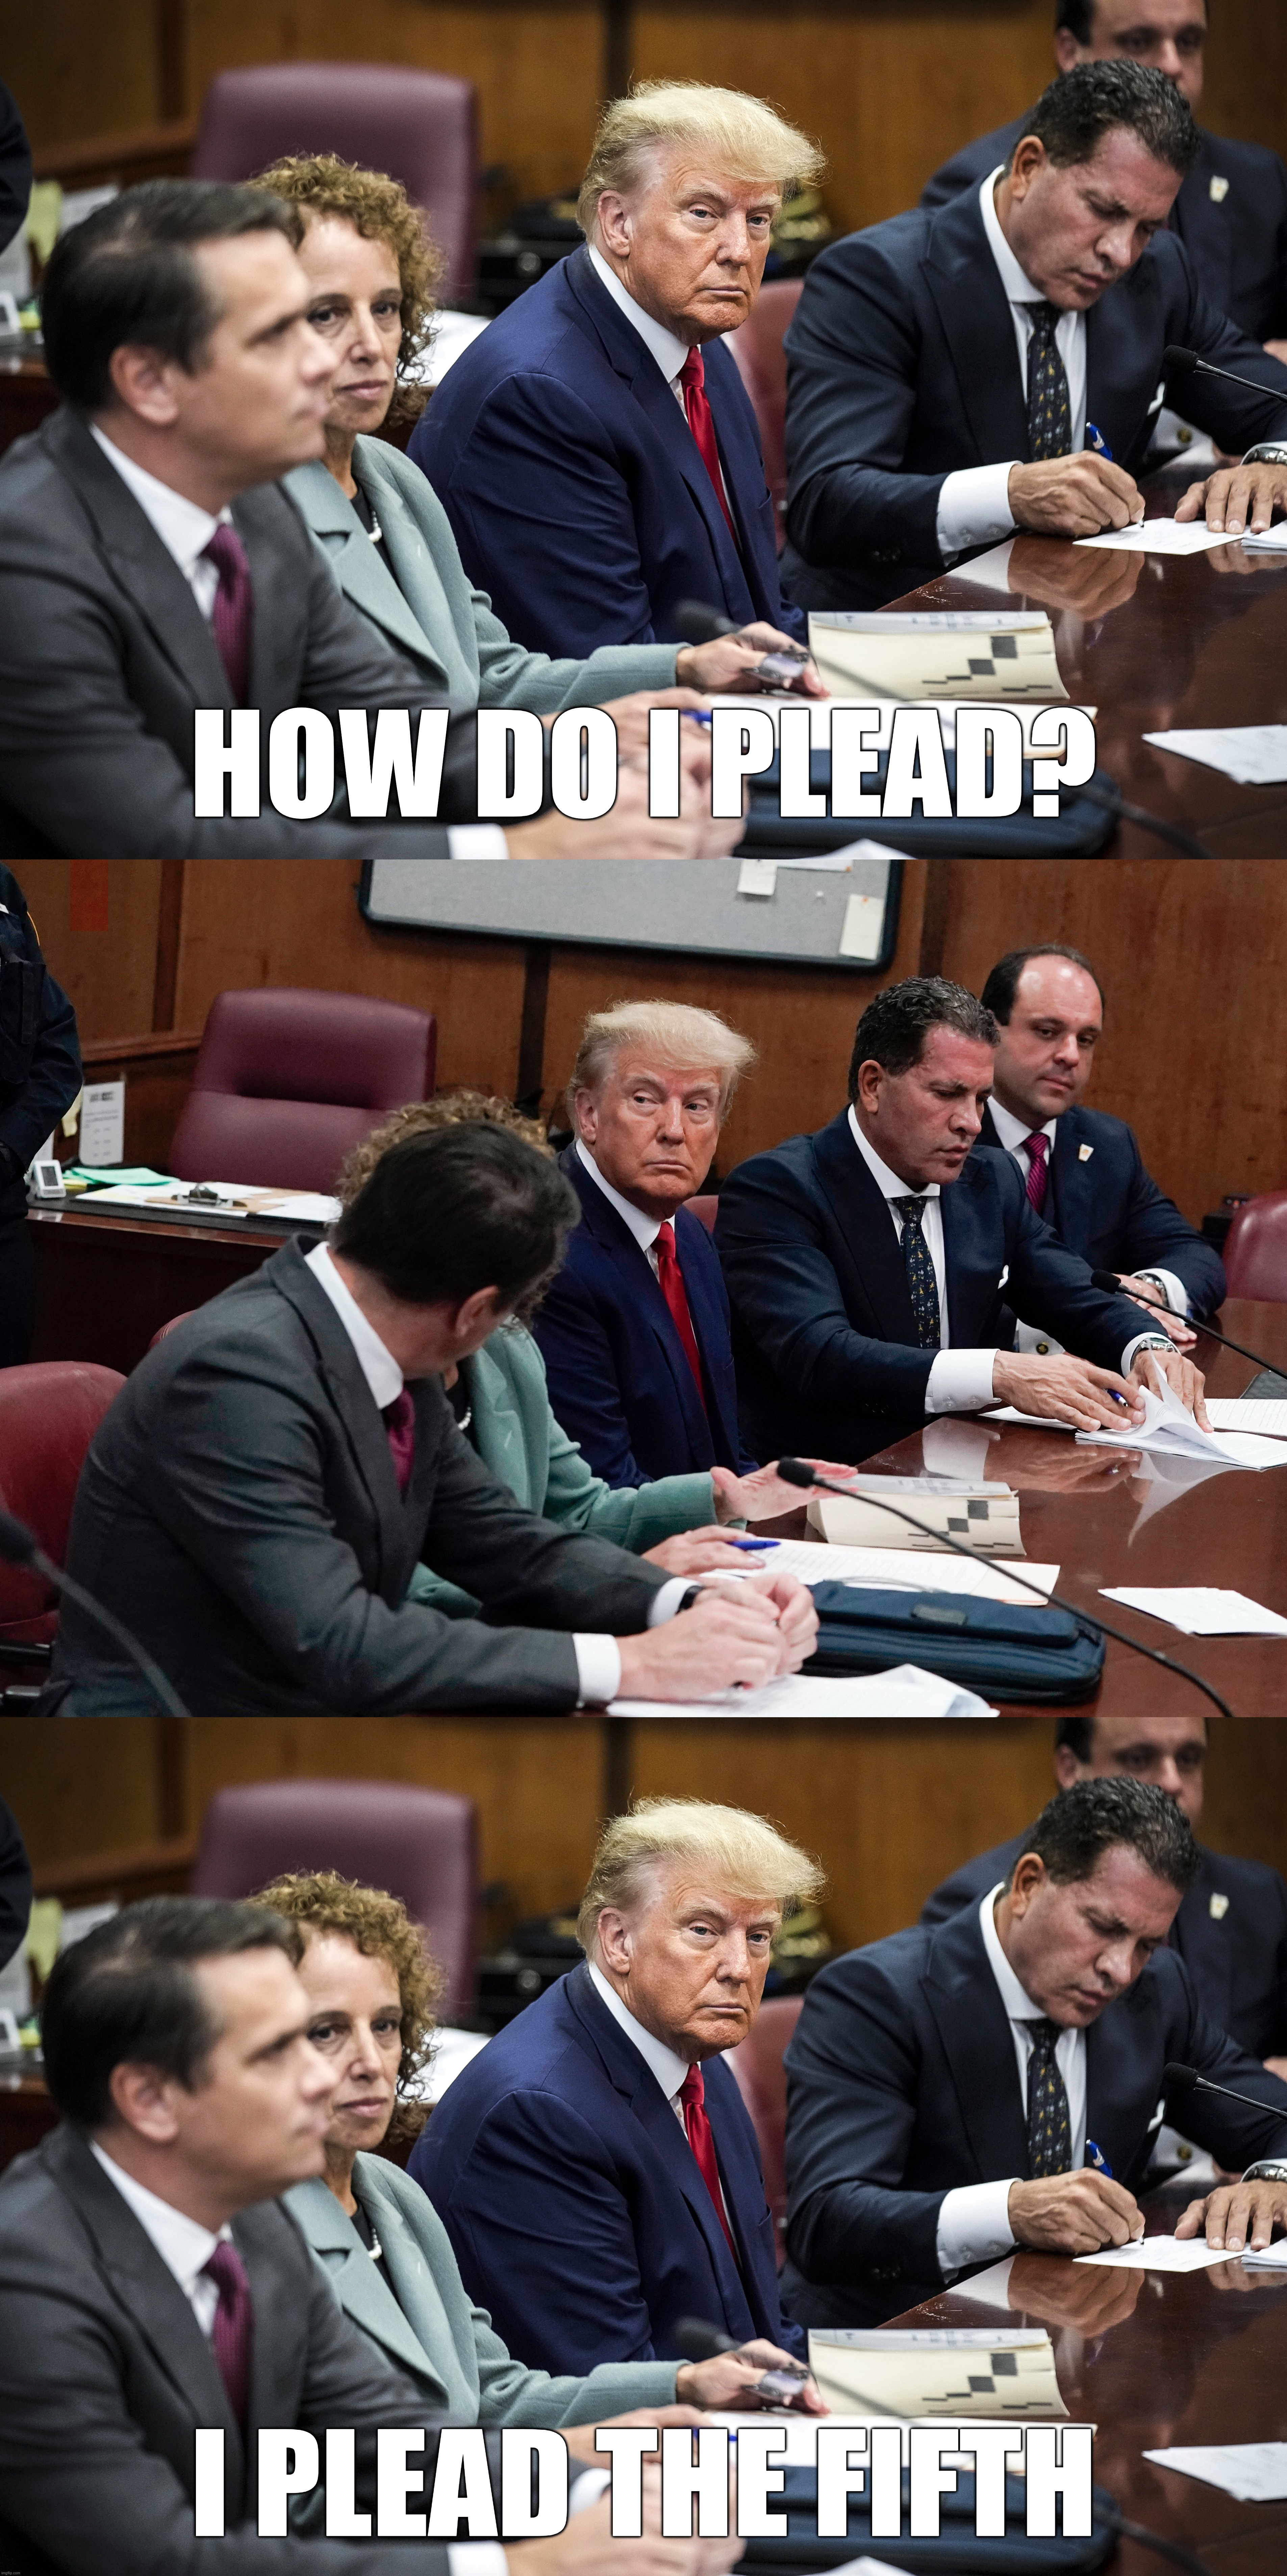 i plead pathetically... | HOW DO I PLEAD? I PLEAD THE FIFTH | image tagged in guilty,af,plead the 5th,mob,boss,lock him up | made w/ Imgflip meme maker